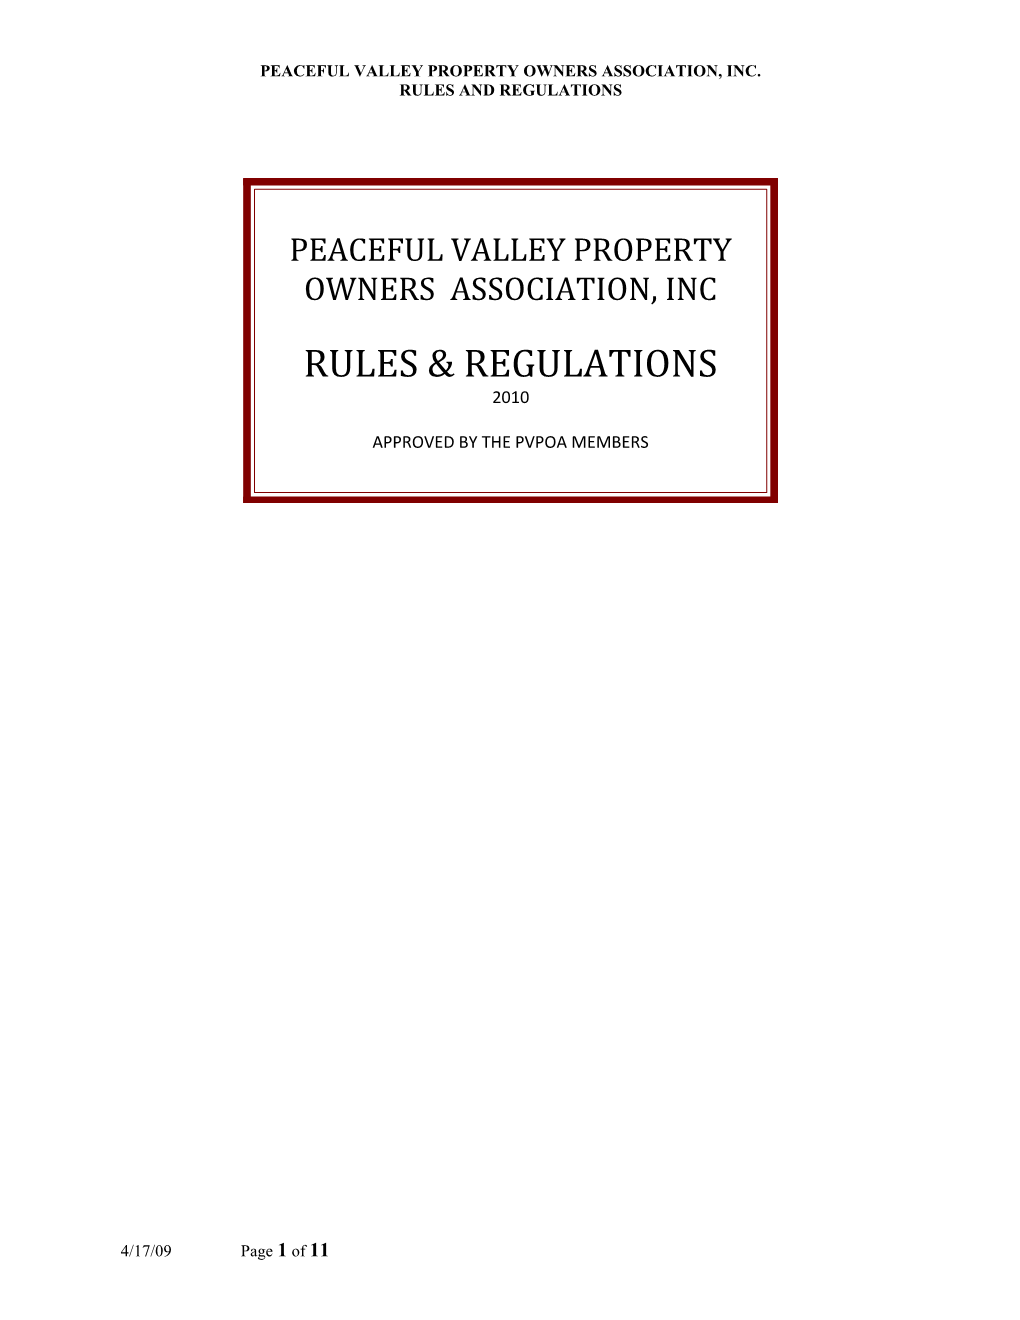 Peacefule Valley Property Owners Association, Inc